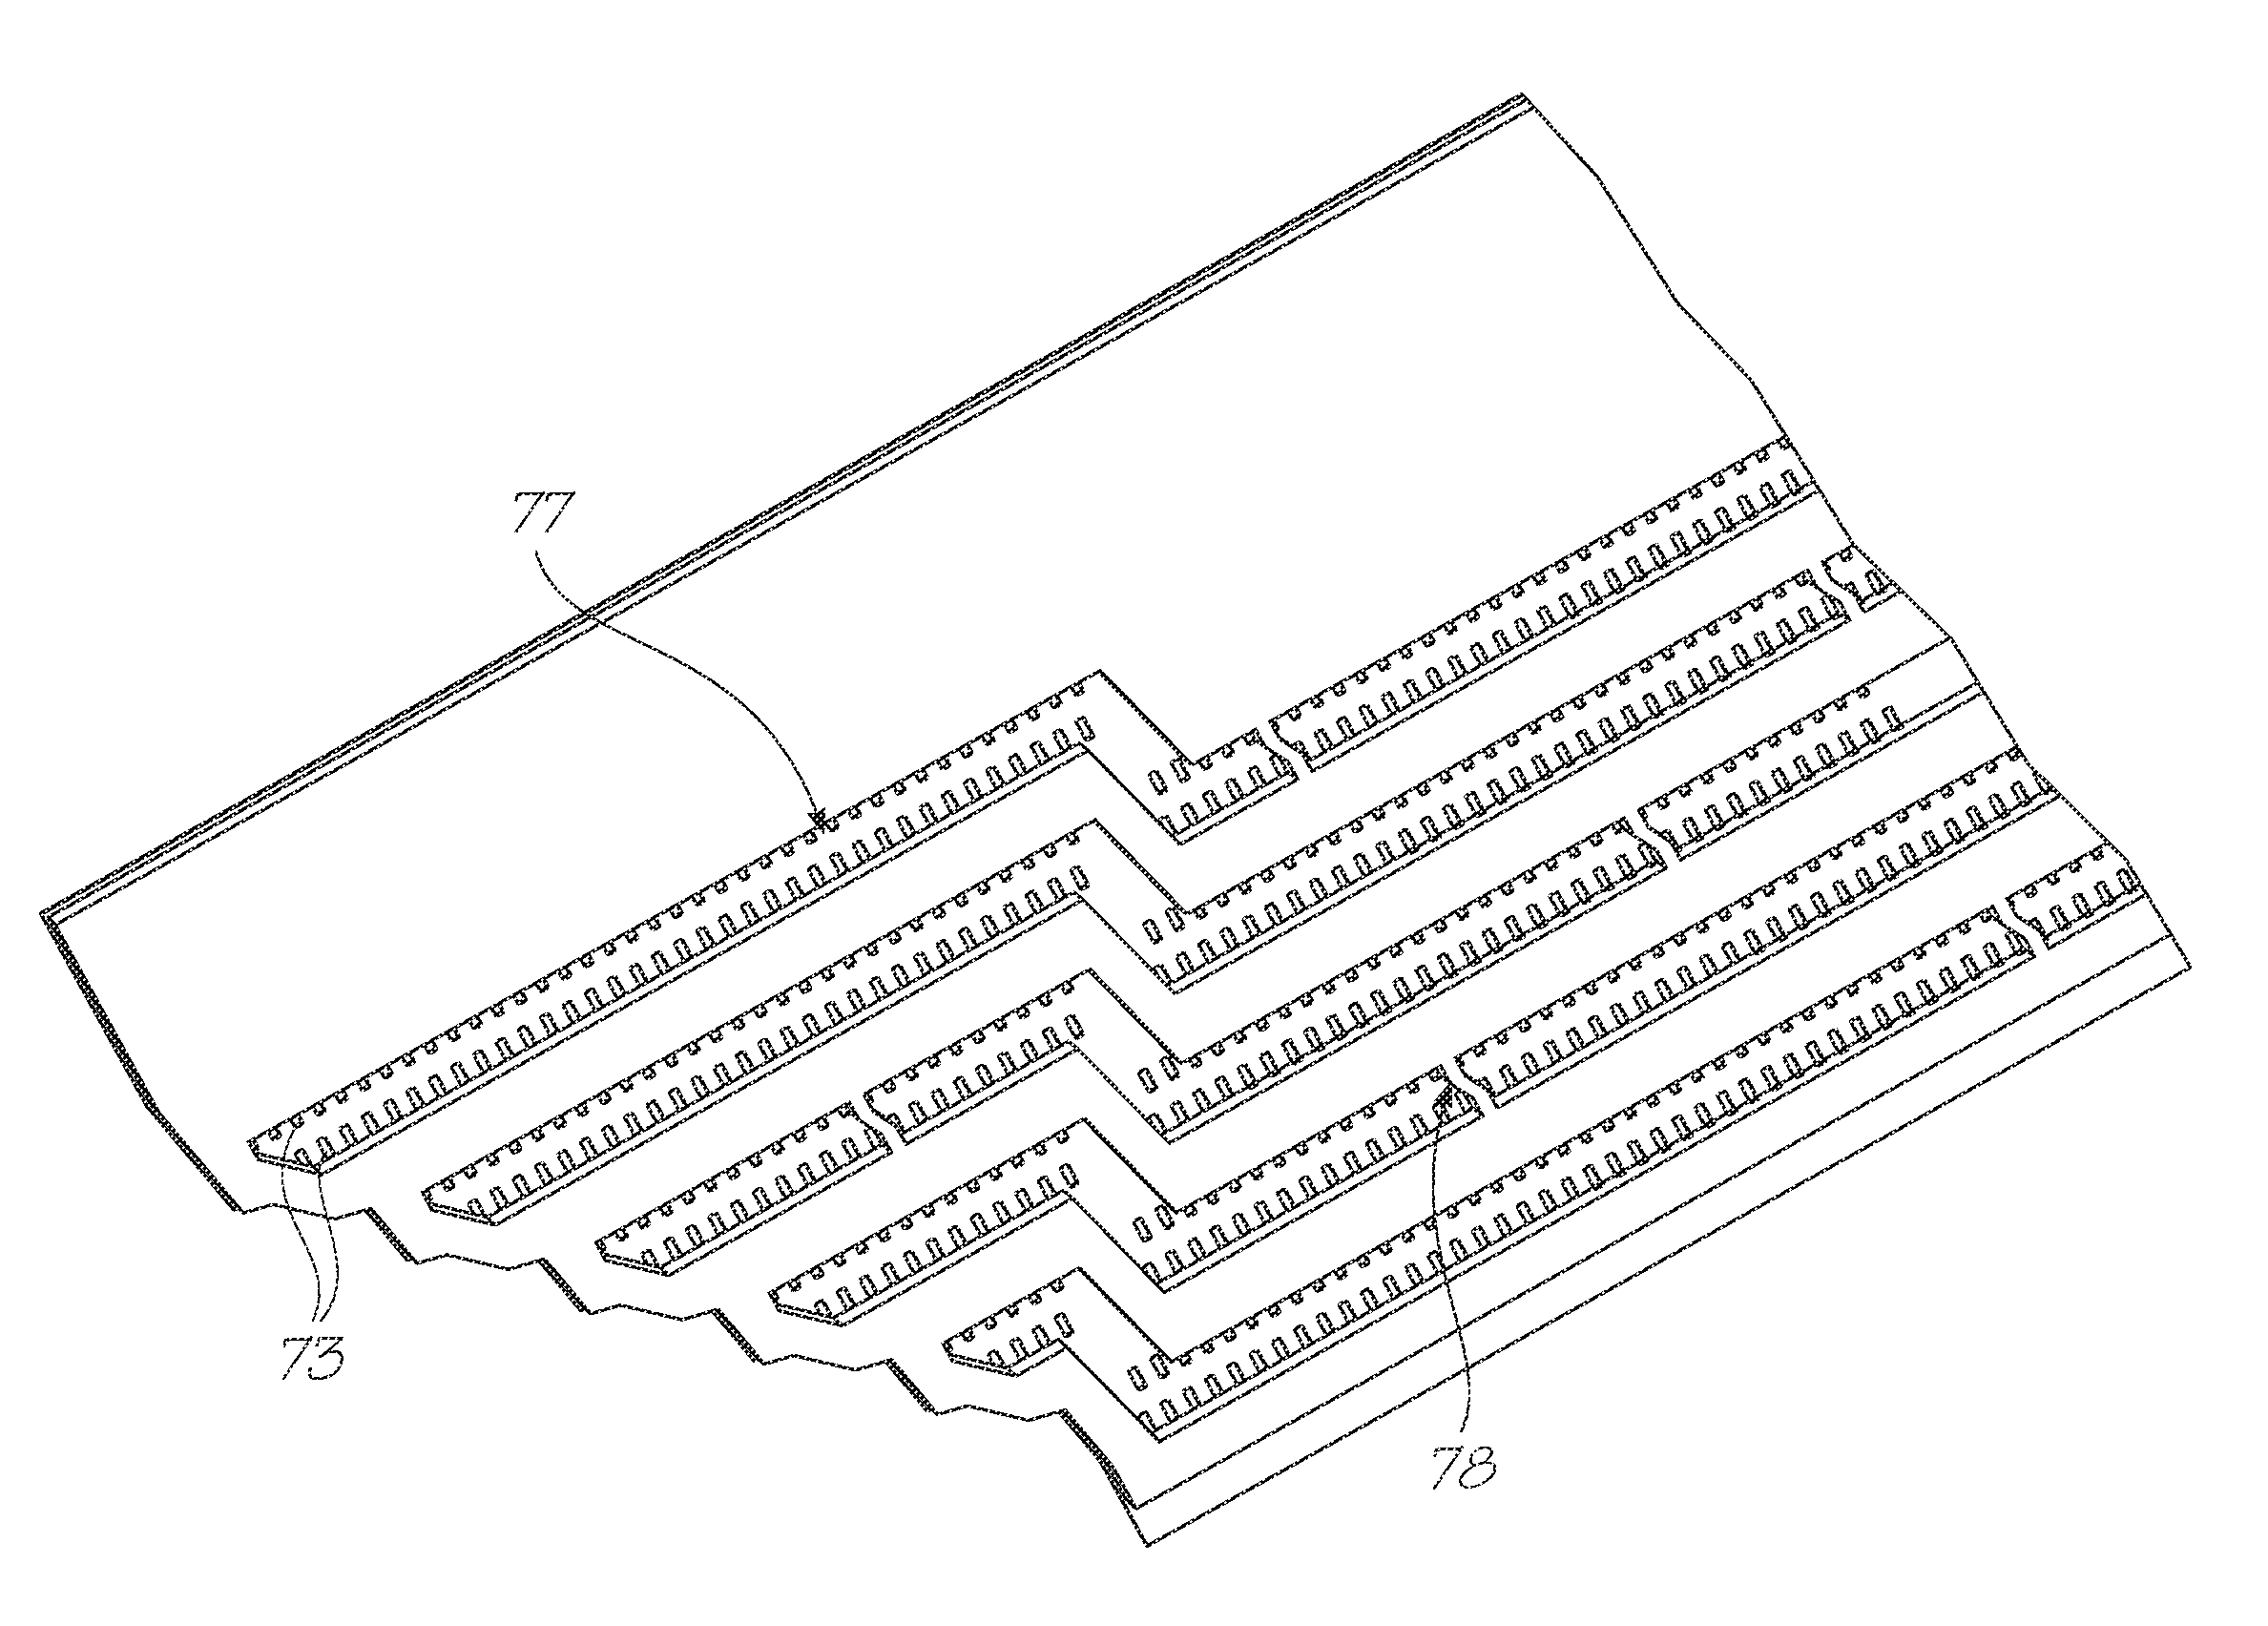 Printhead integrated circuit having longitudinal ink supply channels reinforced by transverse walls